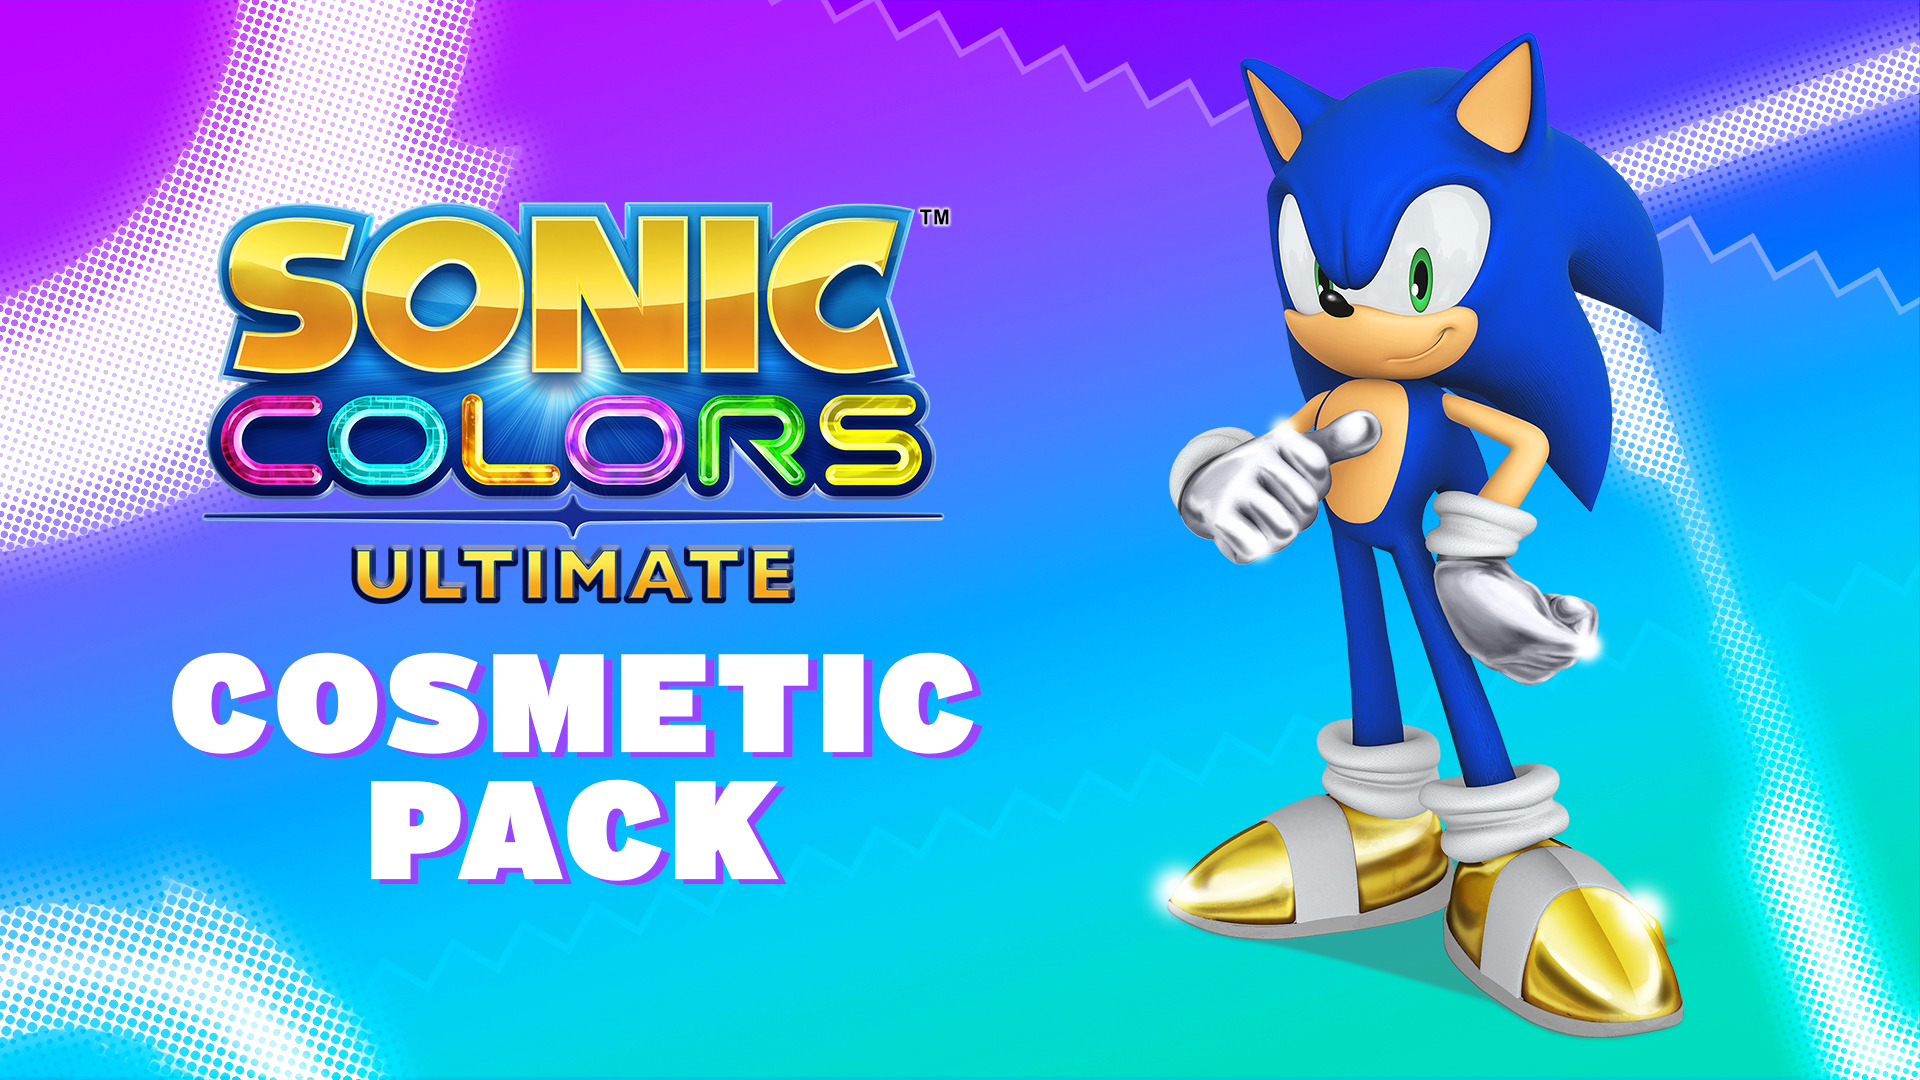 Sonic Colors: Ultimate Wallpapers